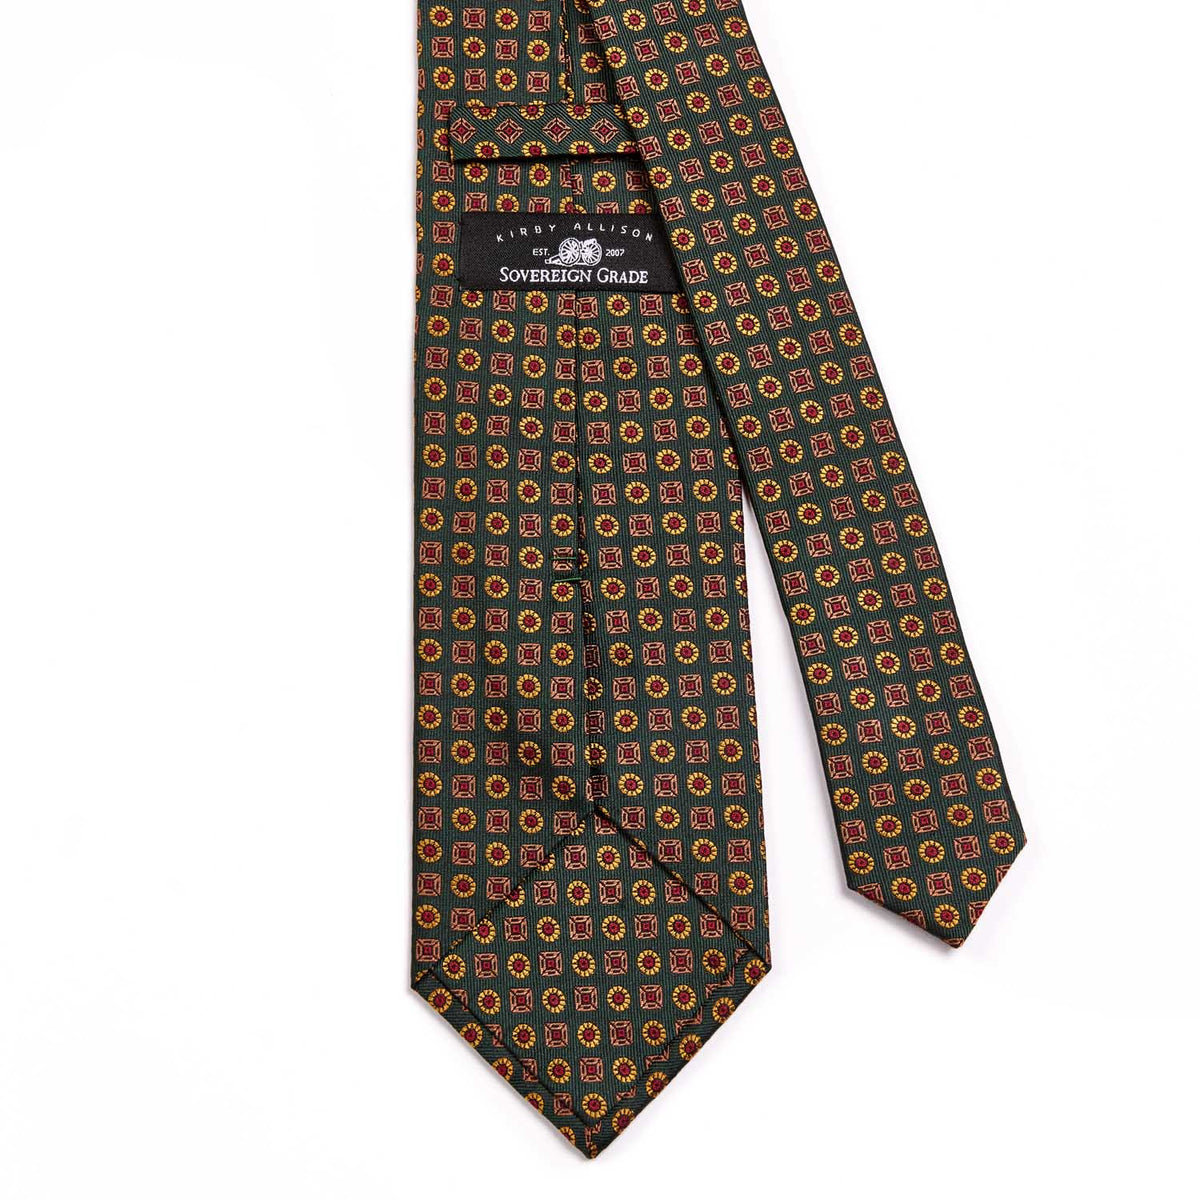 A Sovereign Grade Tartan Floral Jacquard Tie, 150 cm from KirbyAllison.com in orange and green on a white background.